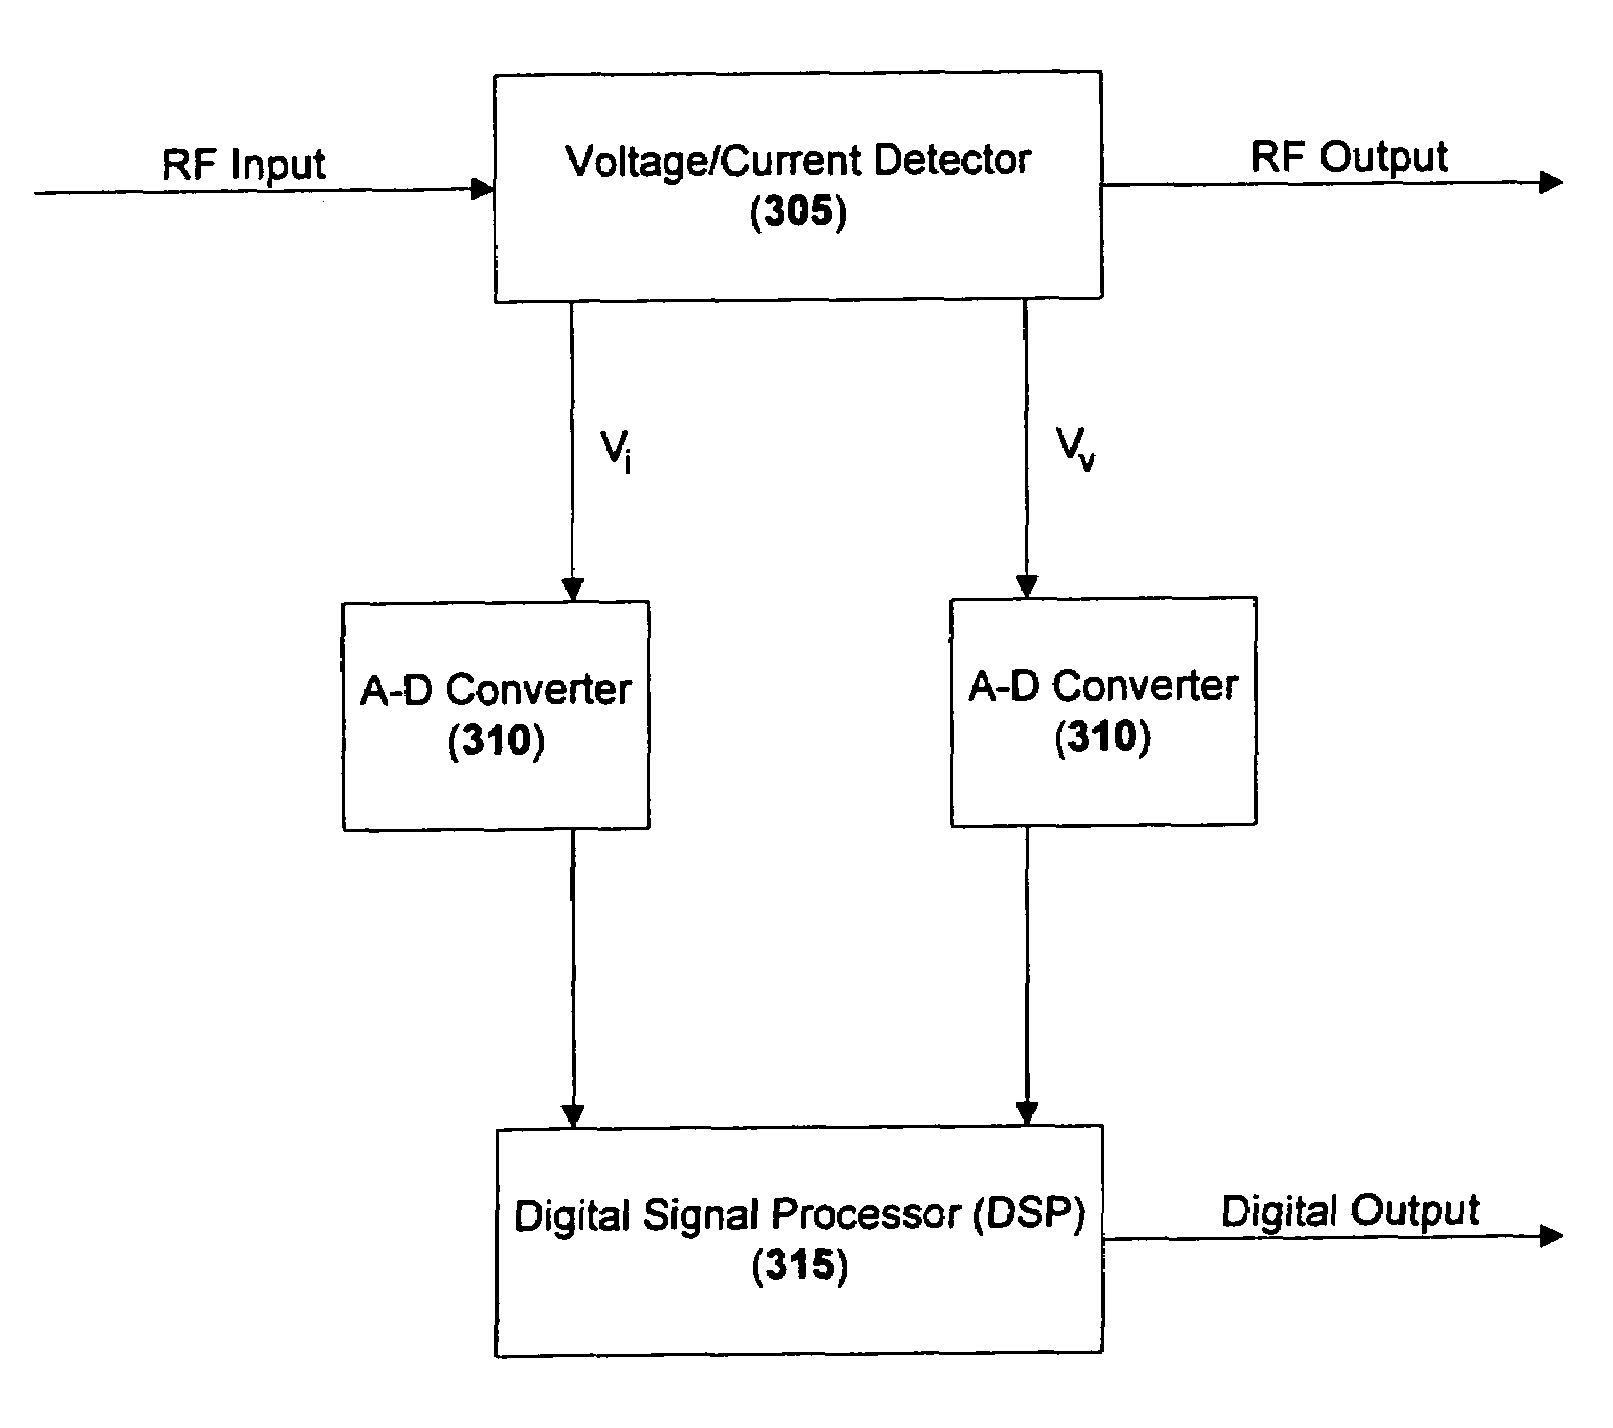 Method of detecting RF powder delivered to a load and complex impedance of the load